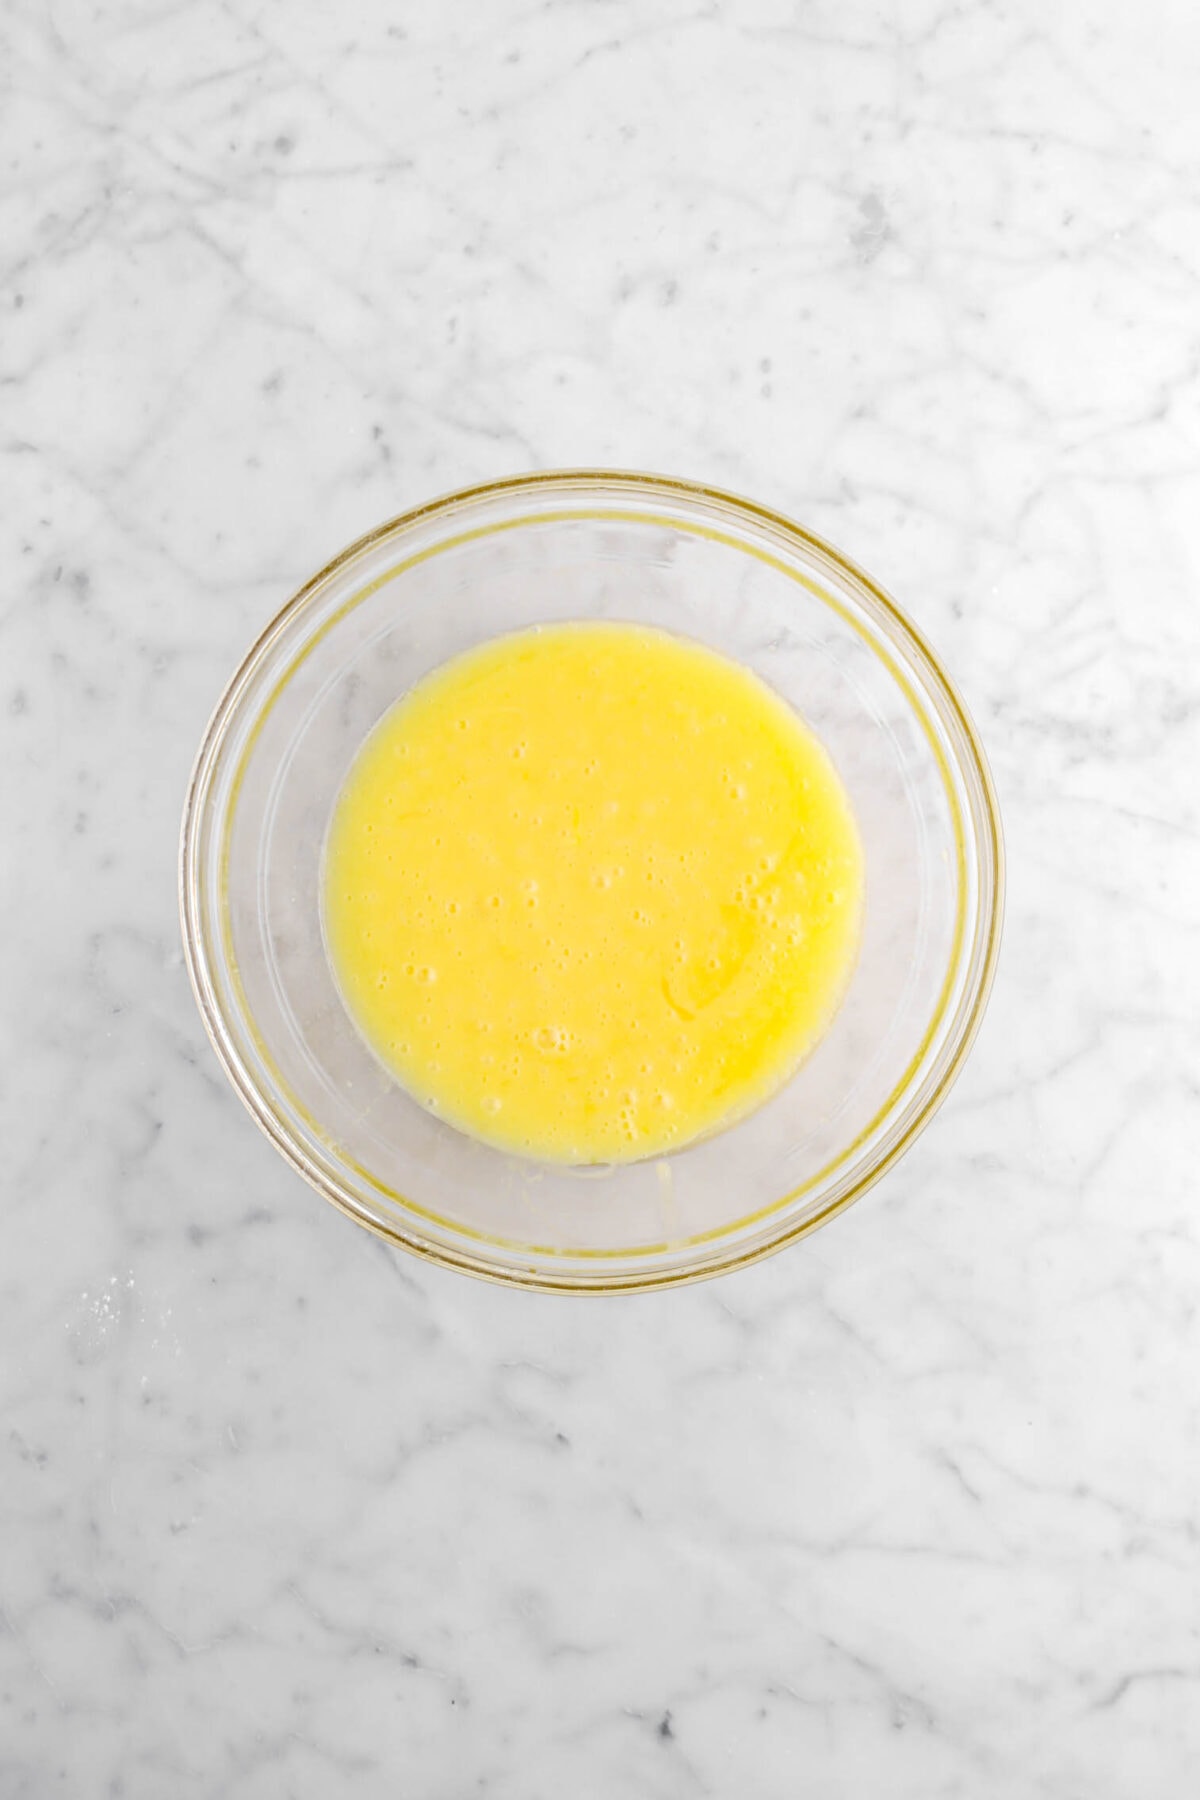 whisked egg mixture in glass bowl.